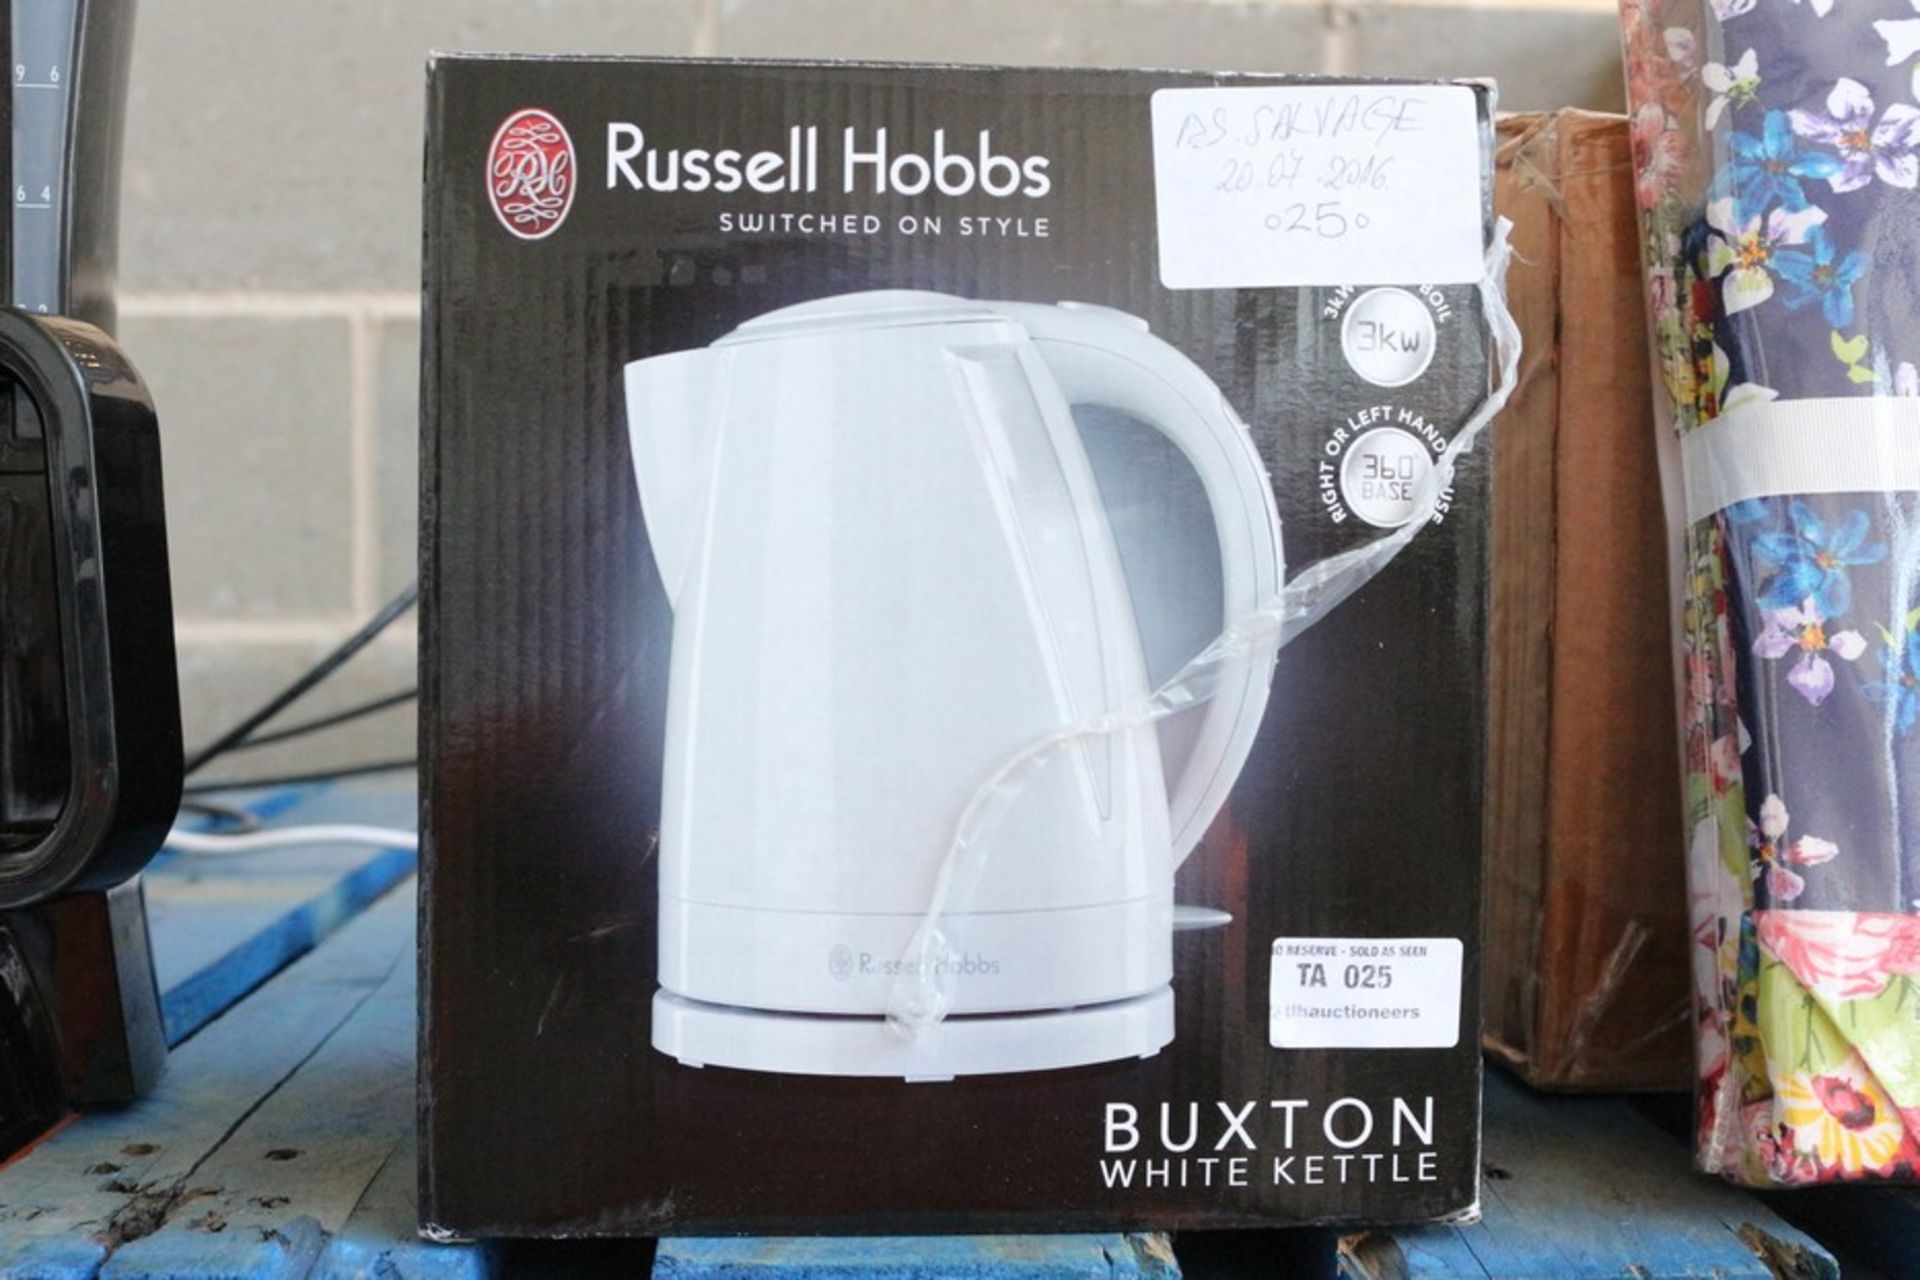 1X BOXED RUSSELL HOBBS BUXTON WHITE KETTLE RRP £25 (DS-SALVAGE)